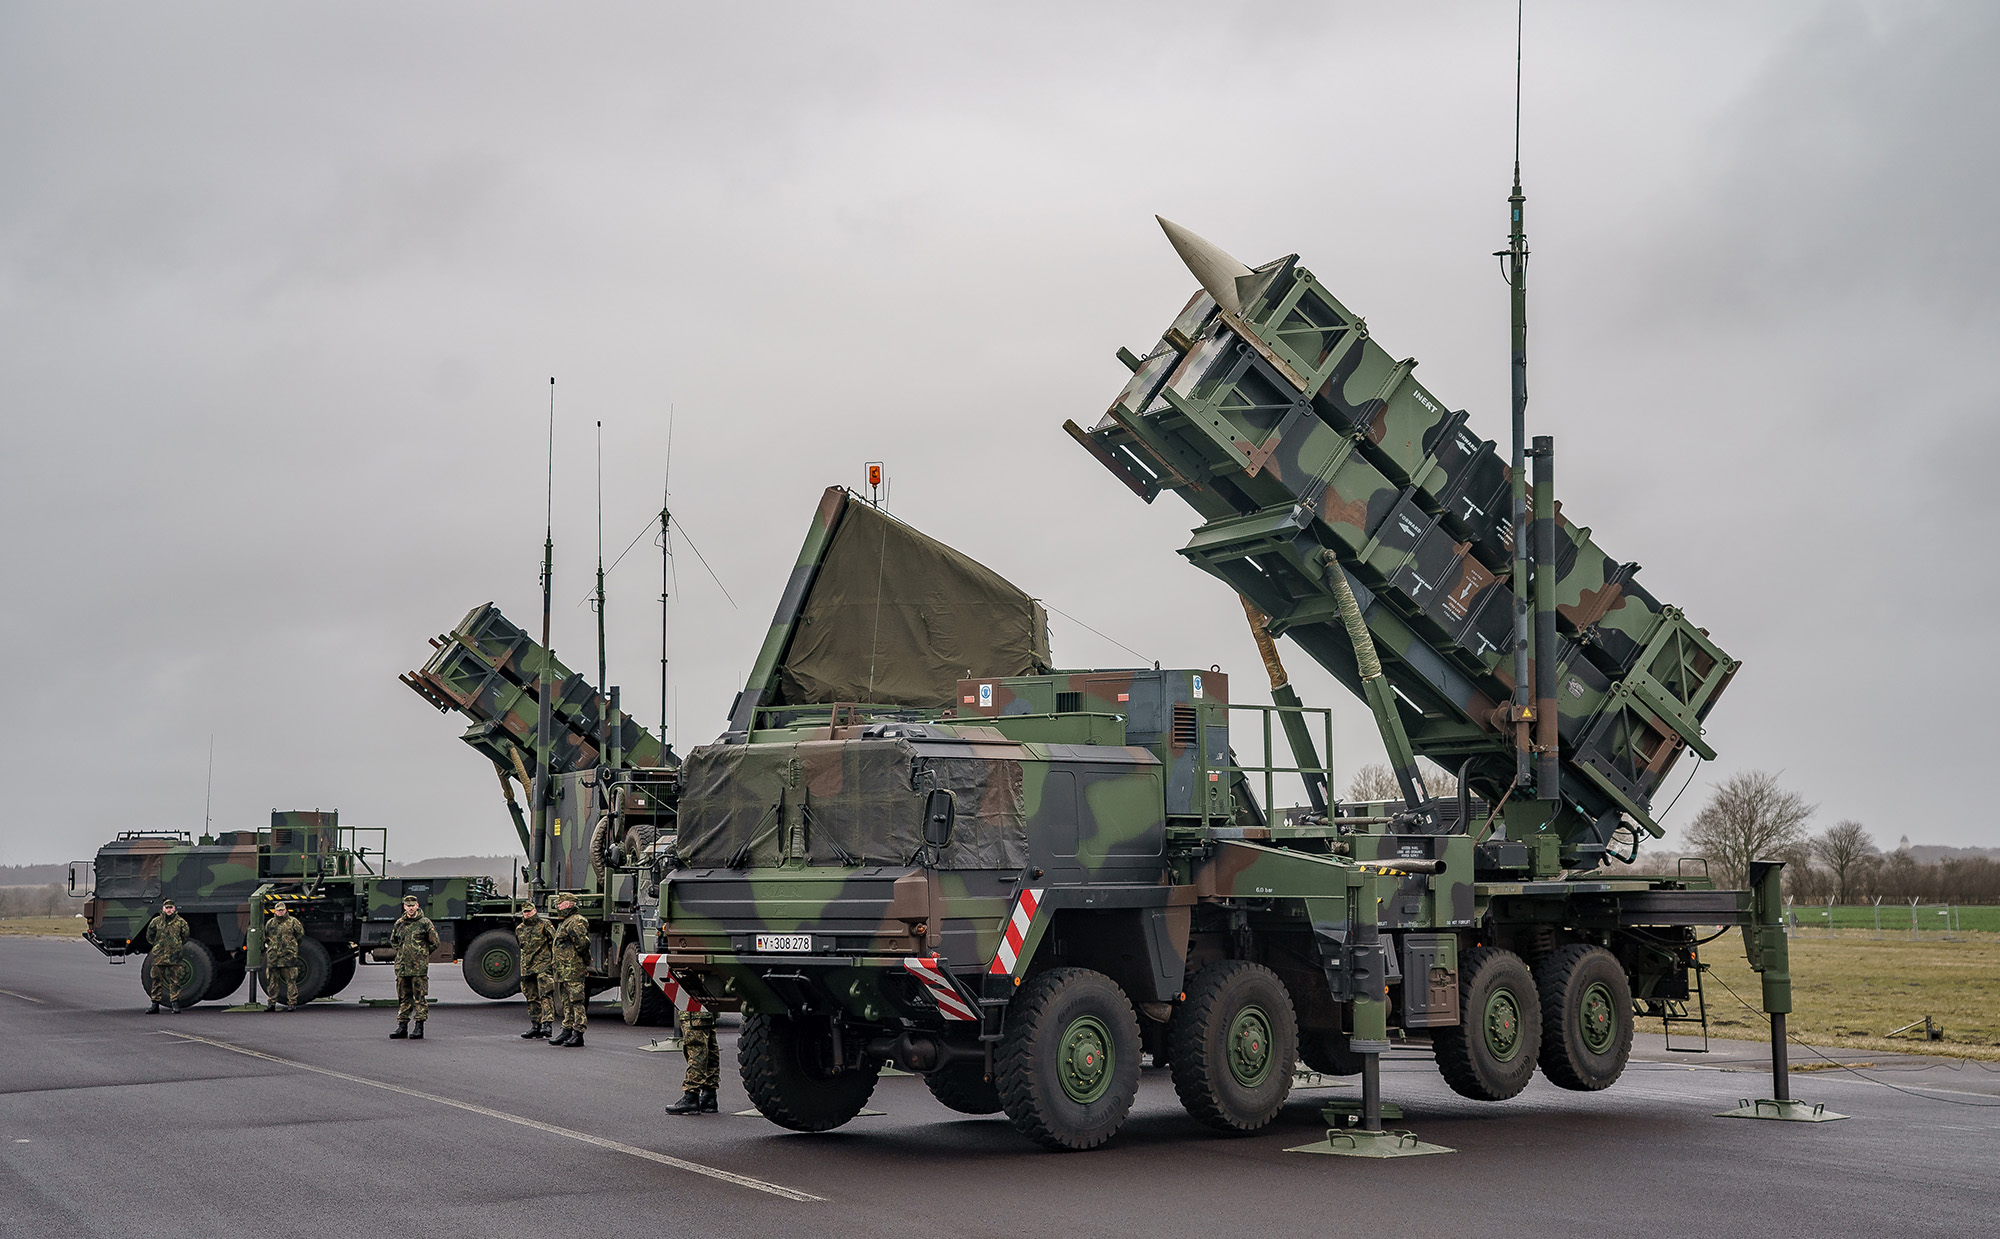 A Patriot anti-aircraft missile system of the Bundeswehr's anti-aircraft missile squadron 1 stands on the airfield of Schwesing military airfield in Germany on March 17.